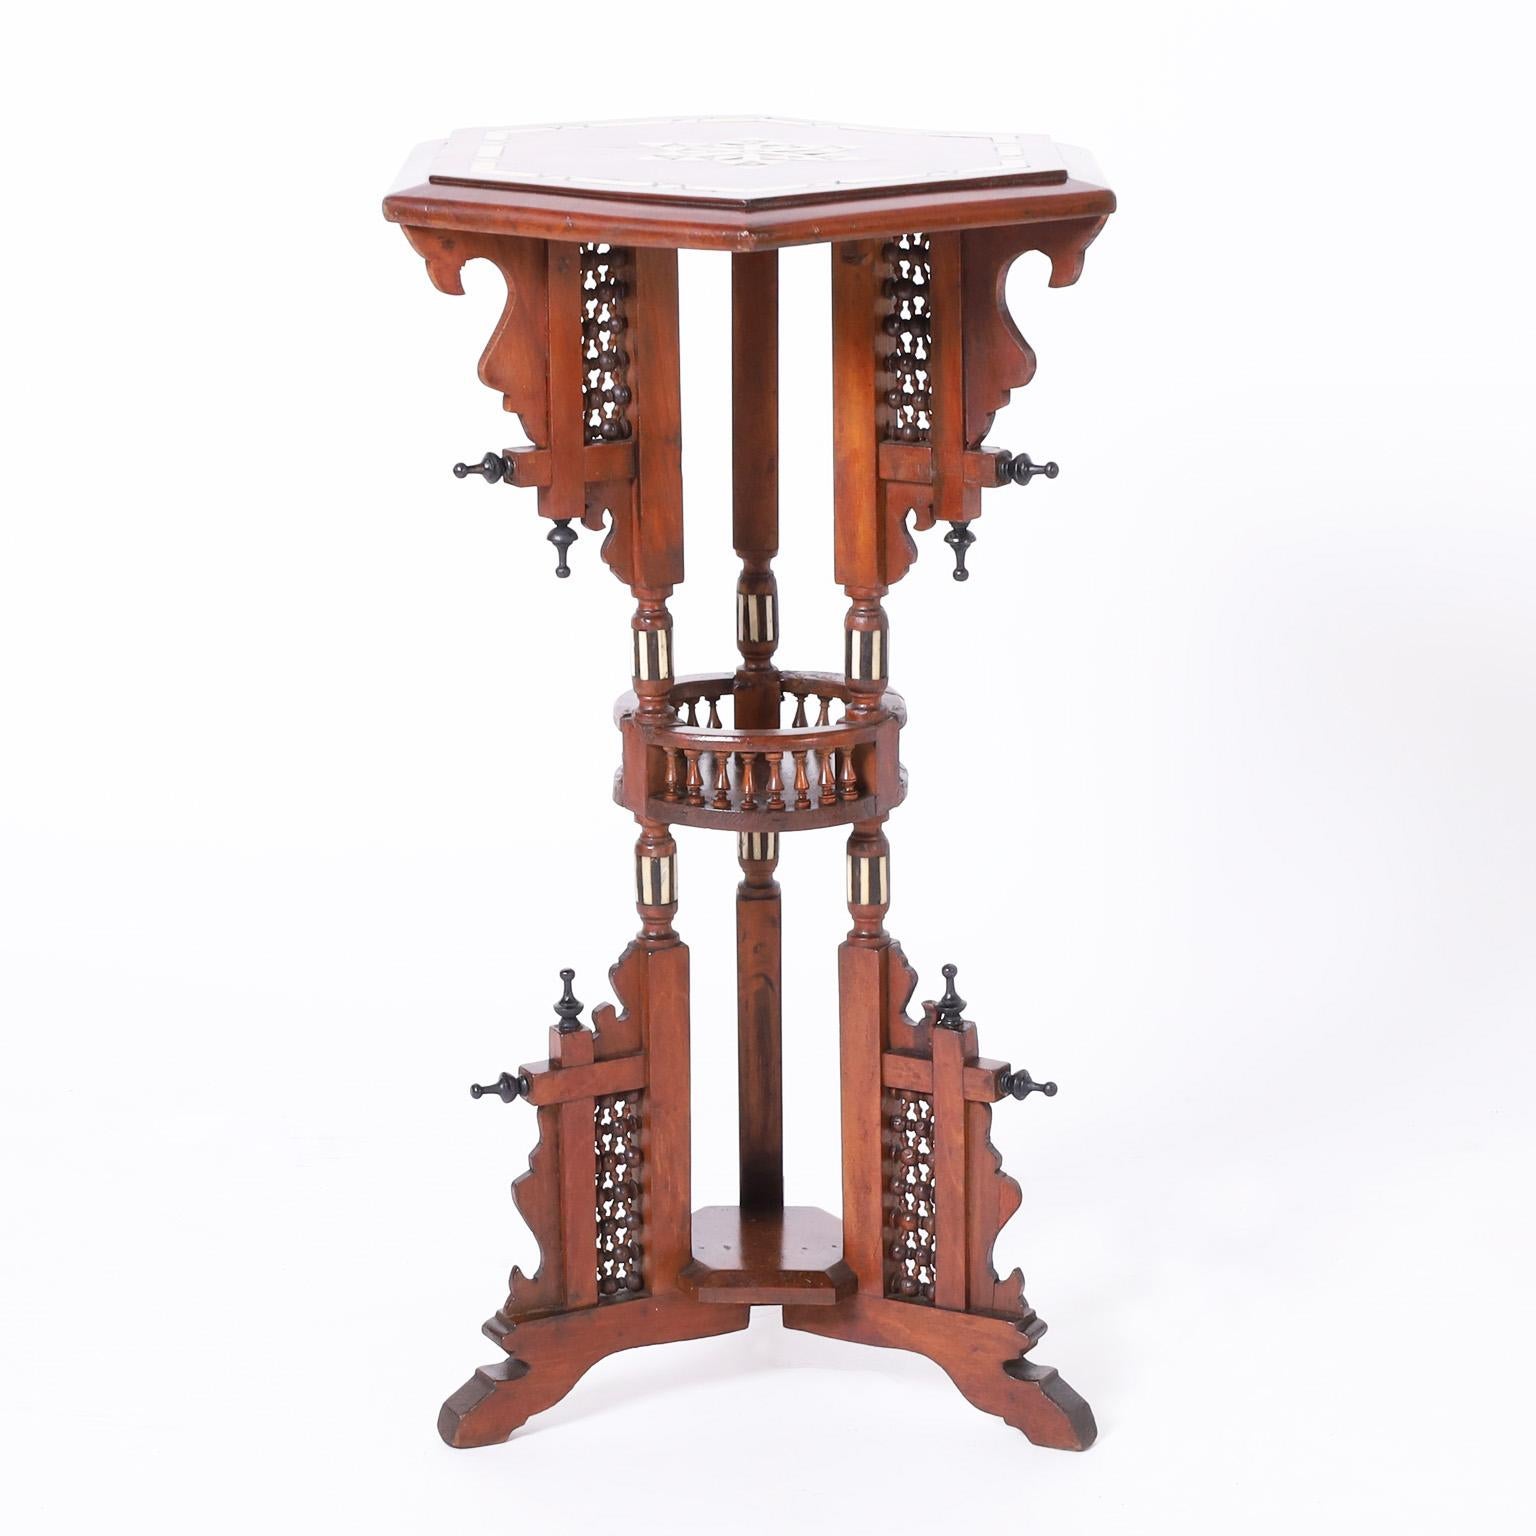 Standout pair of Moroccan stands crafted in mahogany having hexagon form tops with inlaid bone, mother of pearl and ebony in geometric designs on aesthetics movement bases with stick and ball panels, finials and a gallery on three bracket feet.